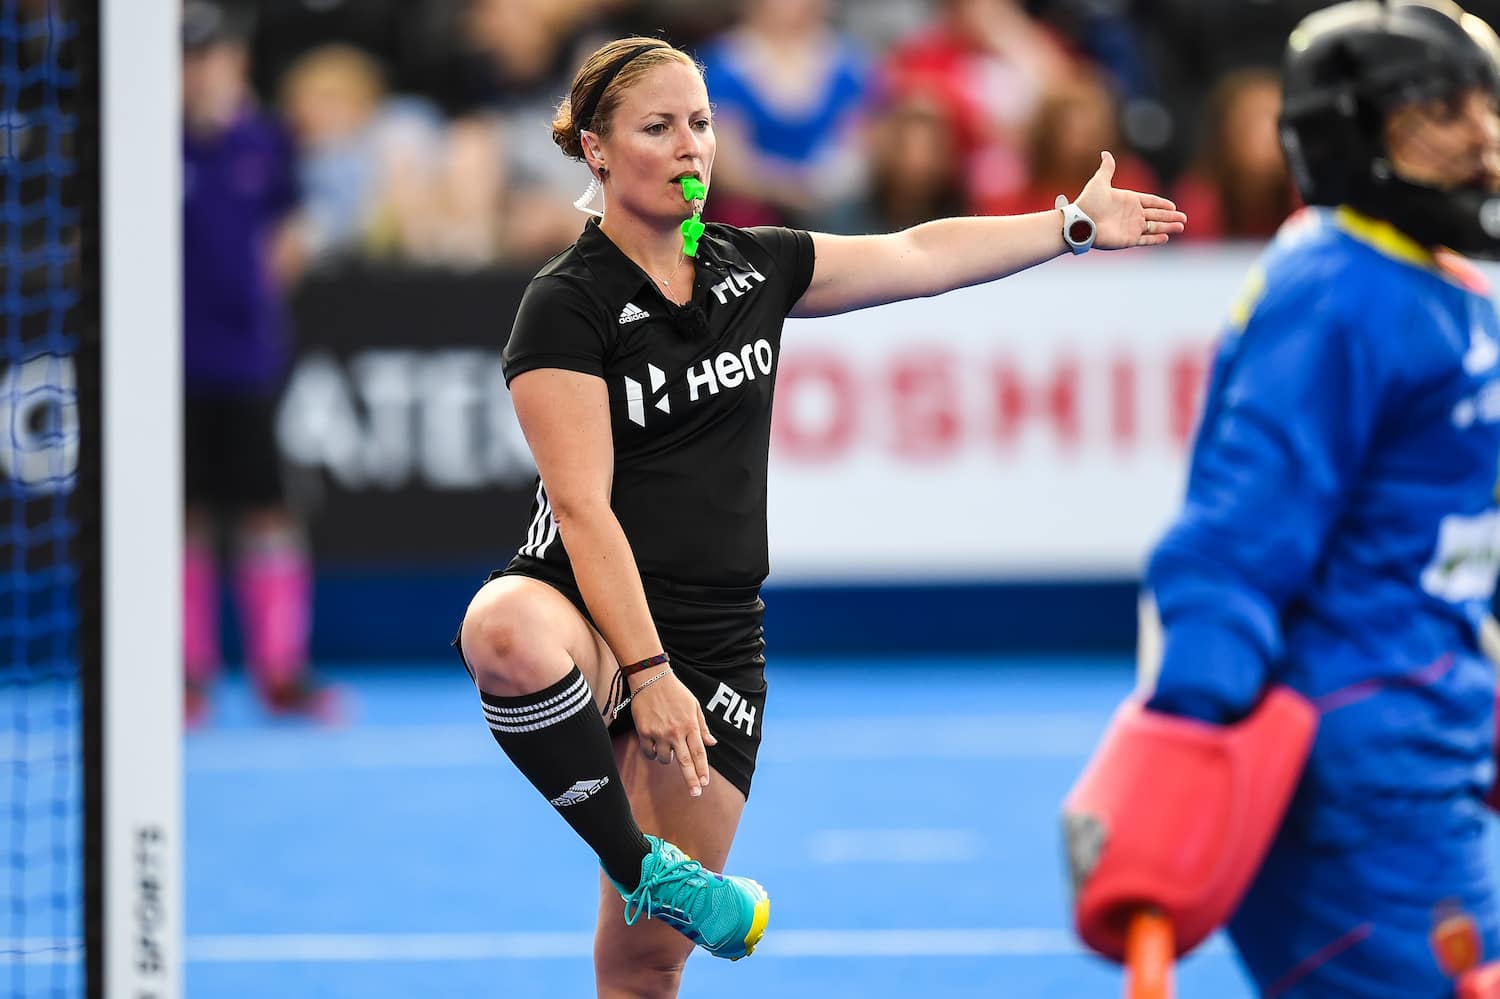 USA Umpire Maggie Giddens officiates the game between Spain and Belgium during the 2018 Vitality Hockey Women's World Cup in London, England